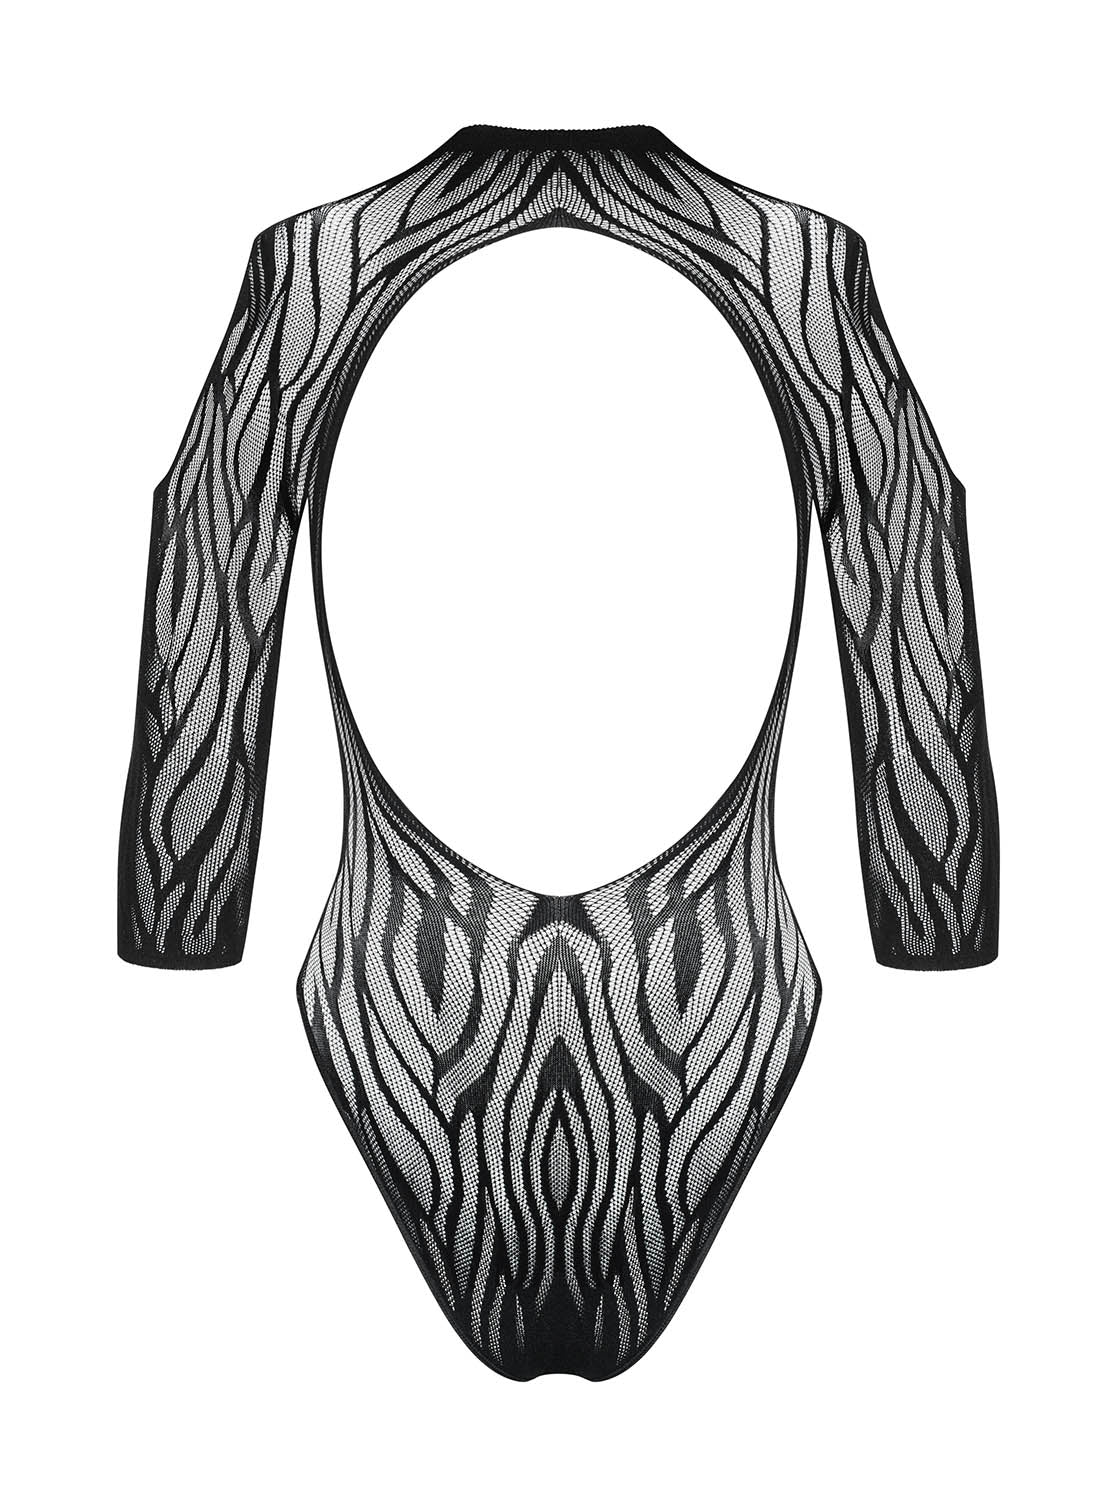 Elegant bodysuit with unique zebra pattern and long sleeves